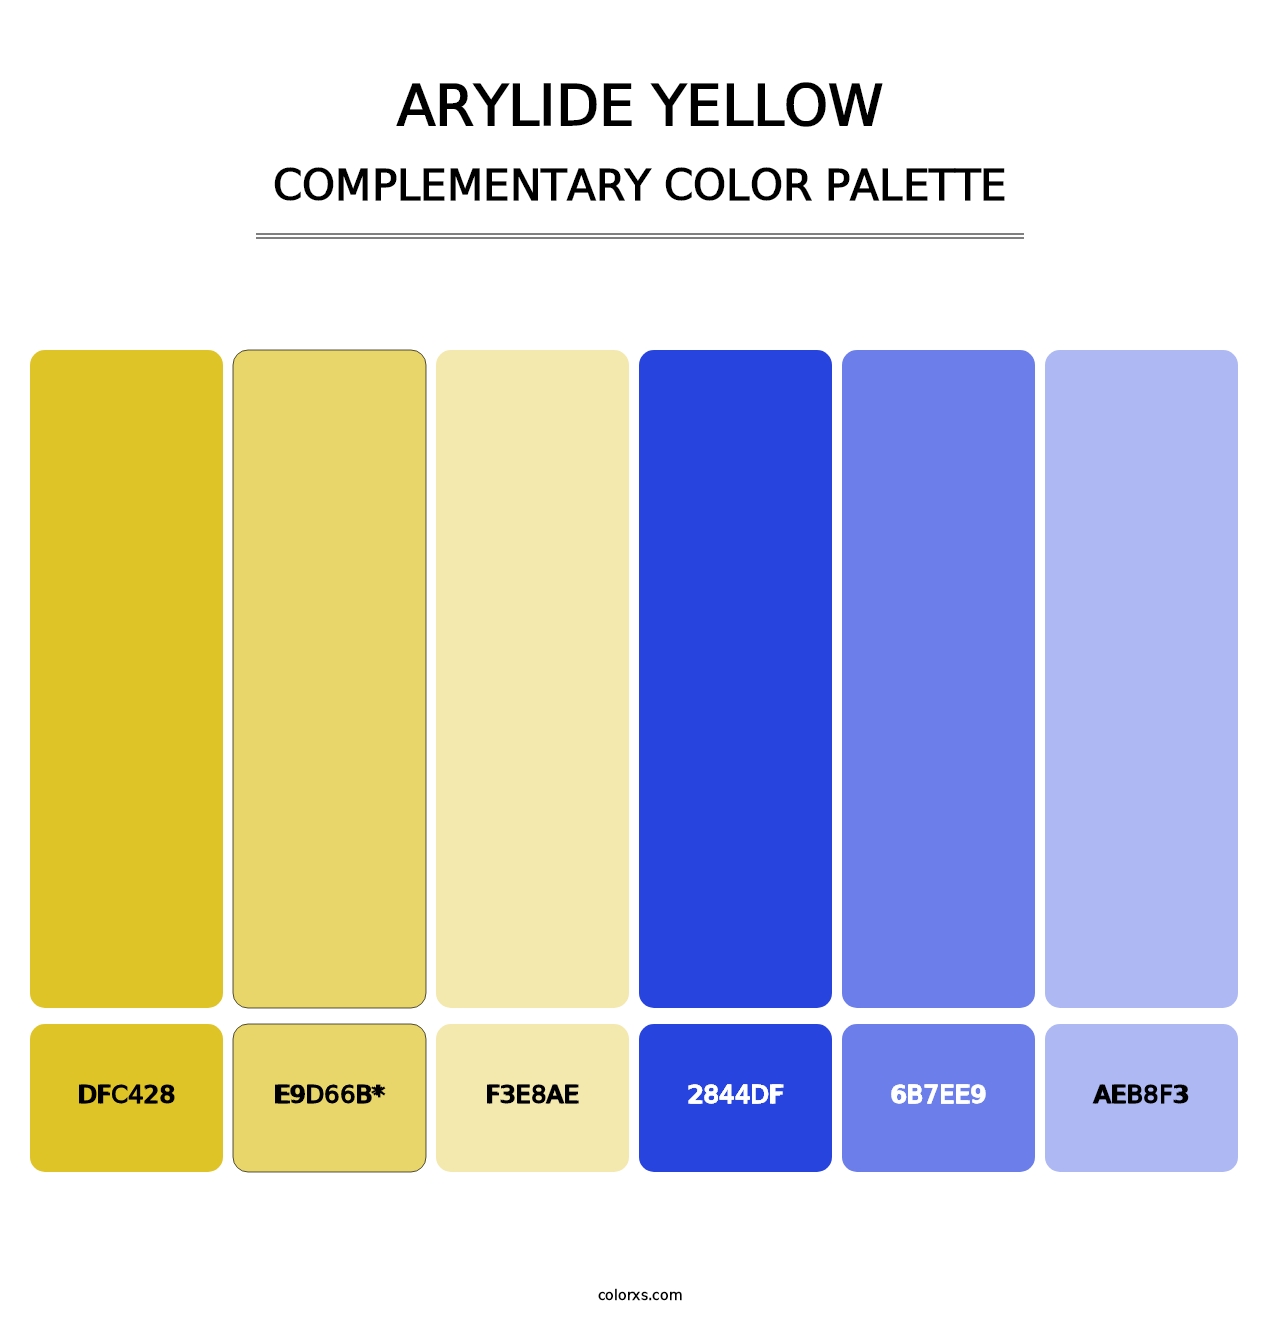 Arylide Yellow - Complementary Color Palette